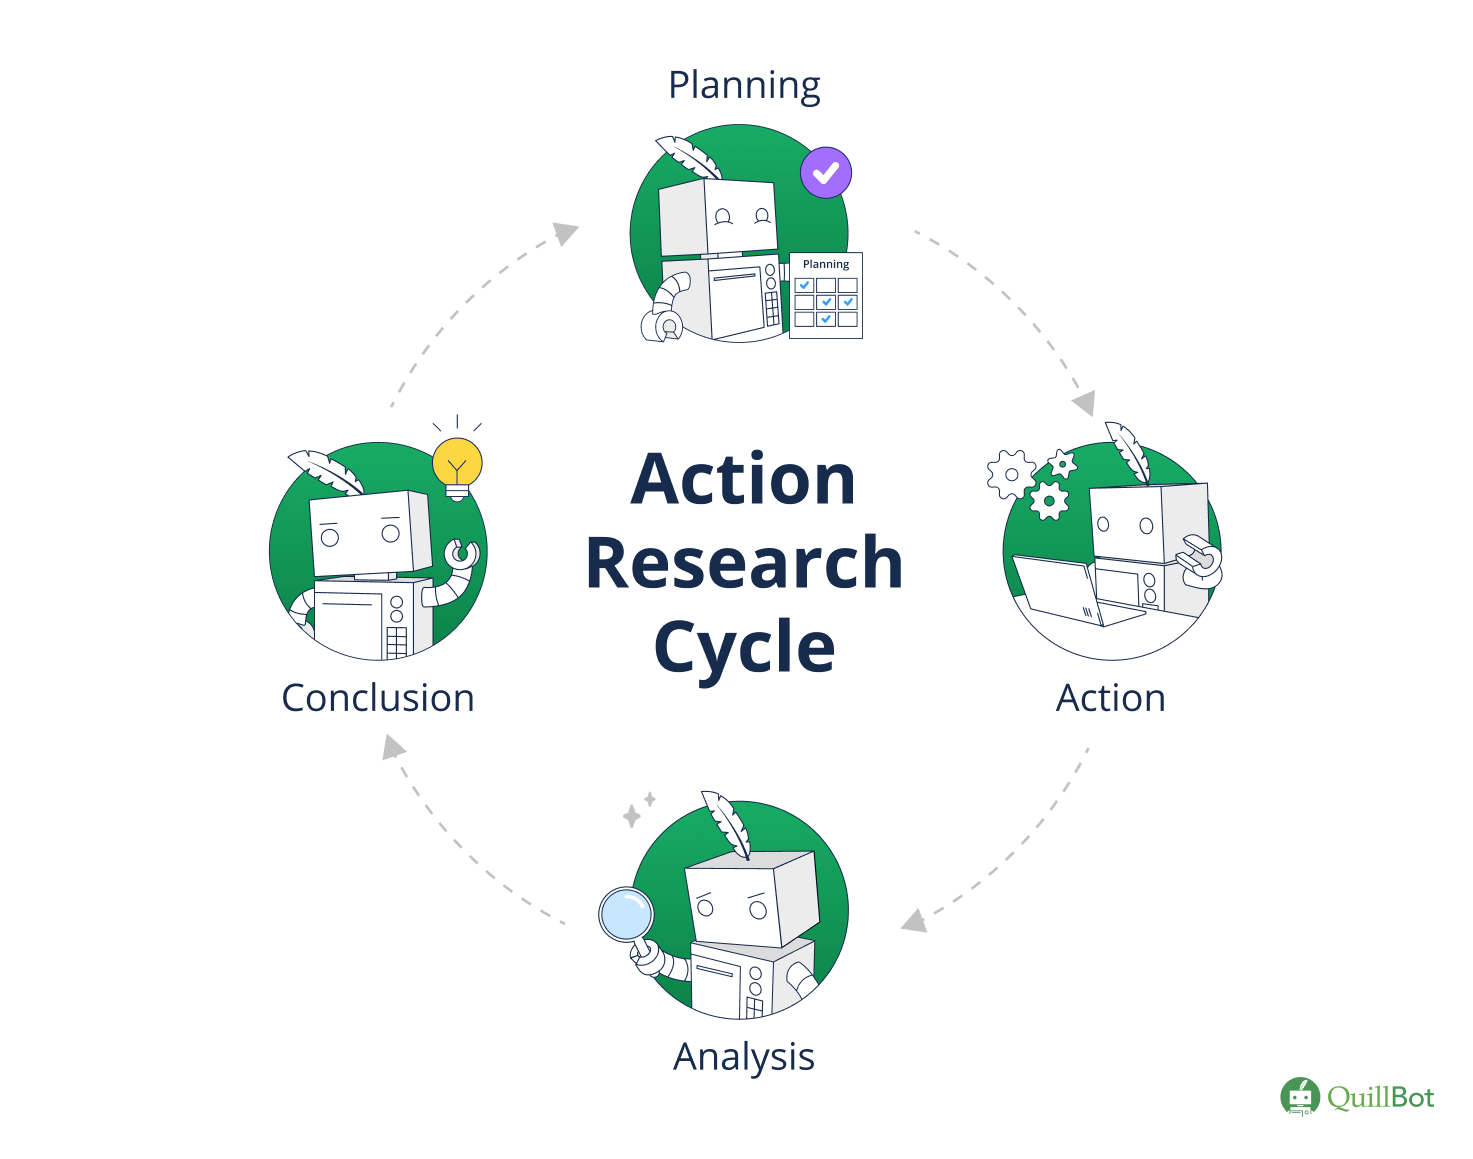 Action research is a research method that combines investigation and intervention to solve a problem.